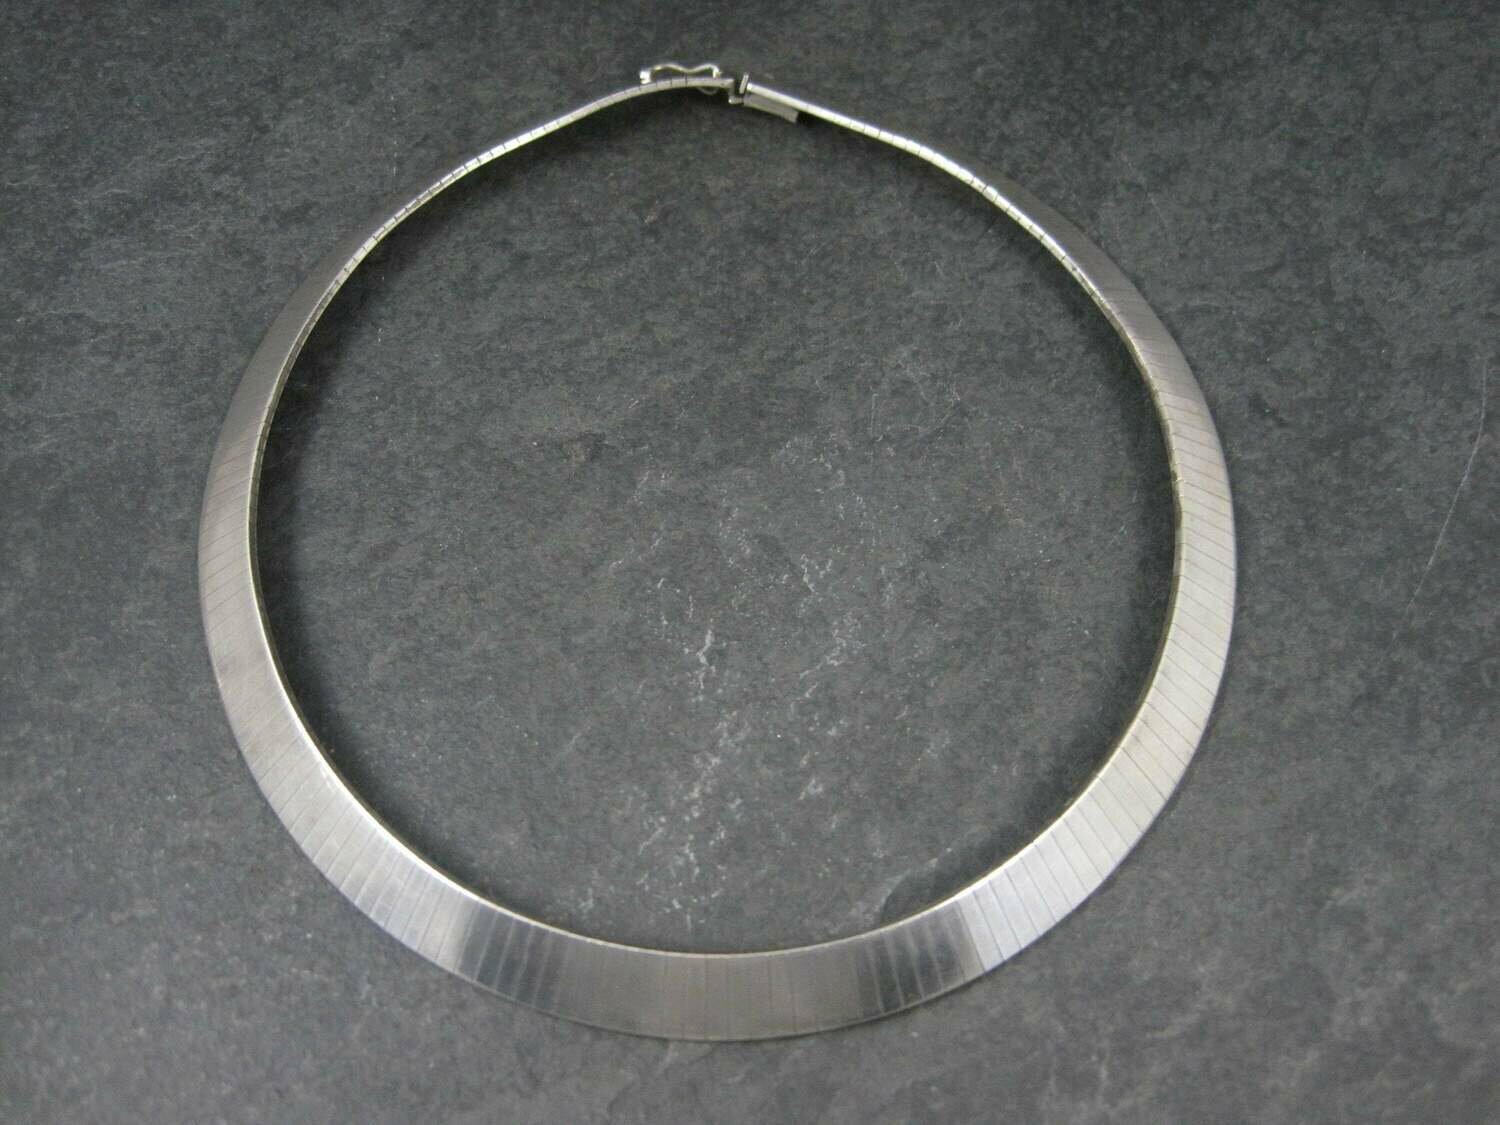 Vintage Italian Sterling 10mm Choker Necklace 14 Inches